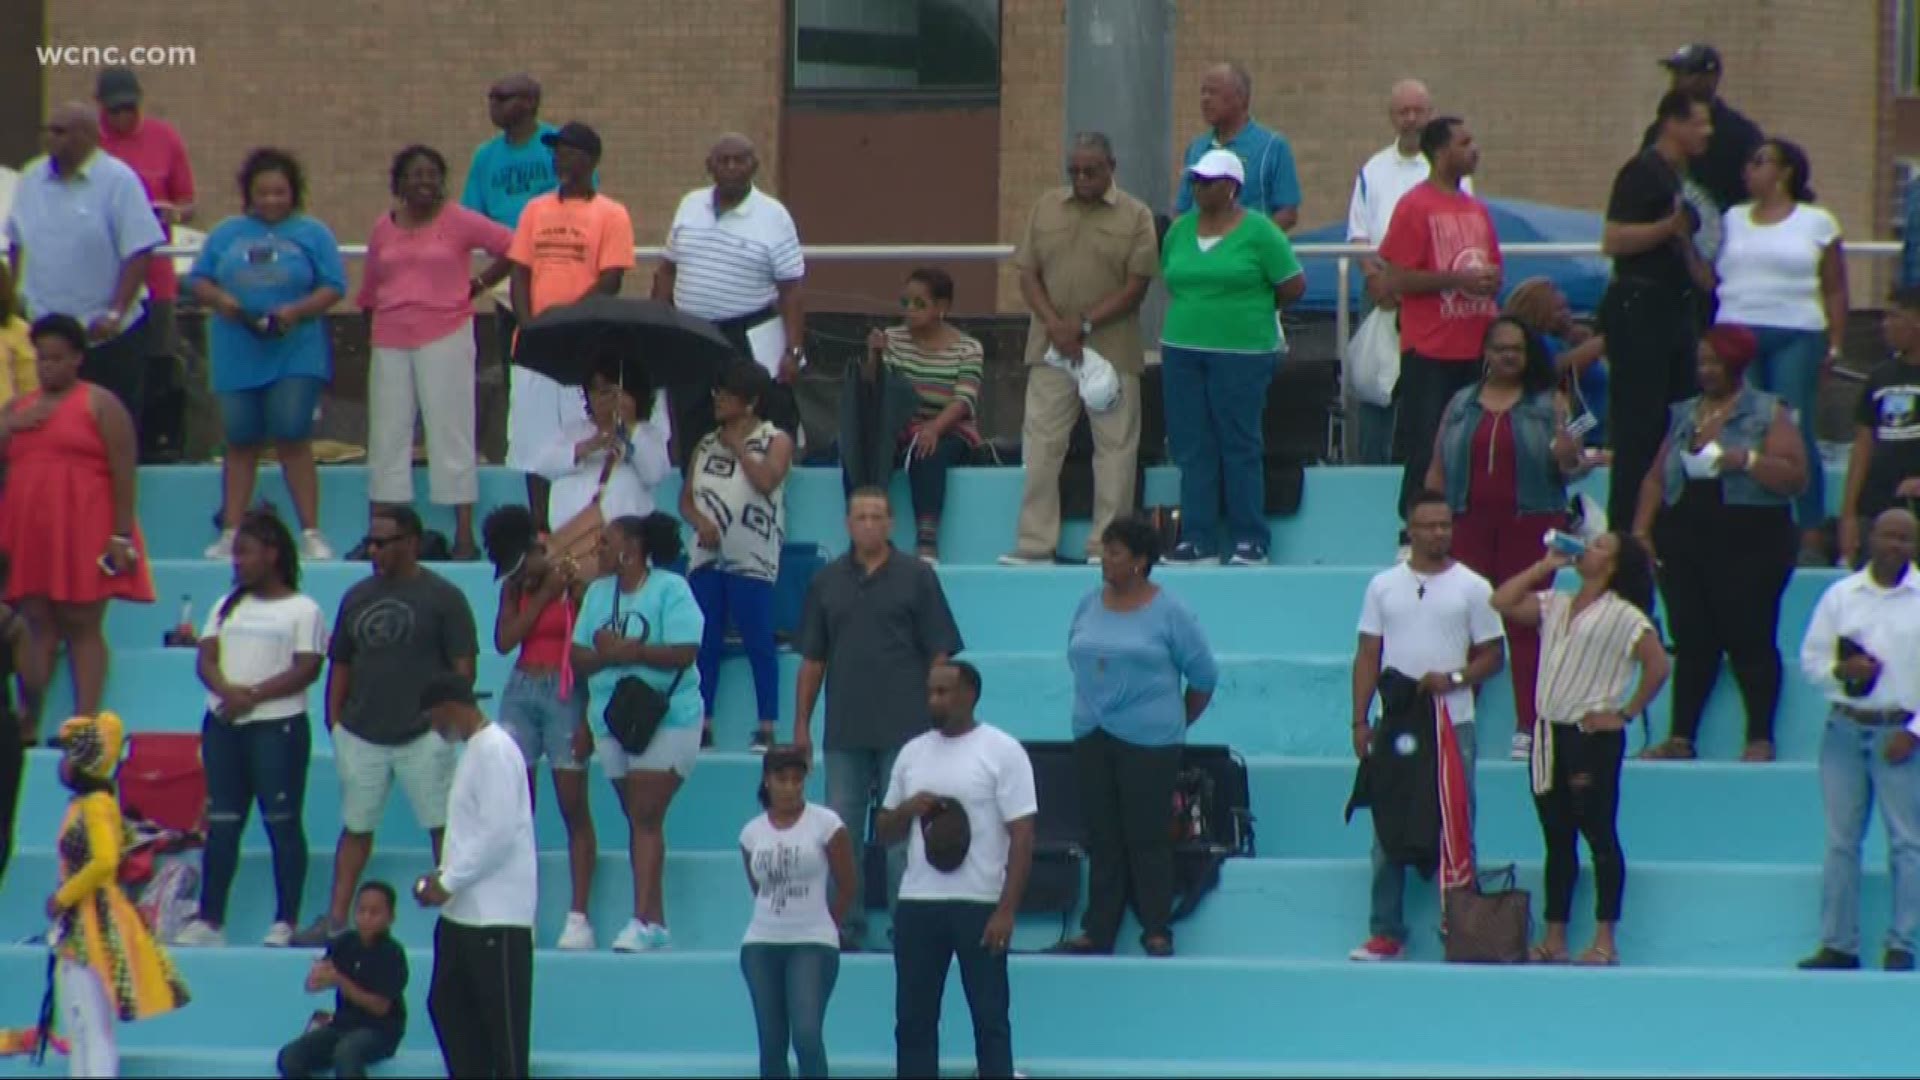 A community came together to remember the South Carolina police officer murdered earlier in the week.